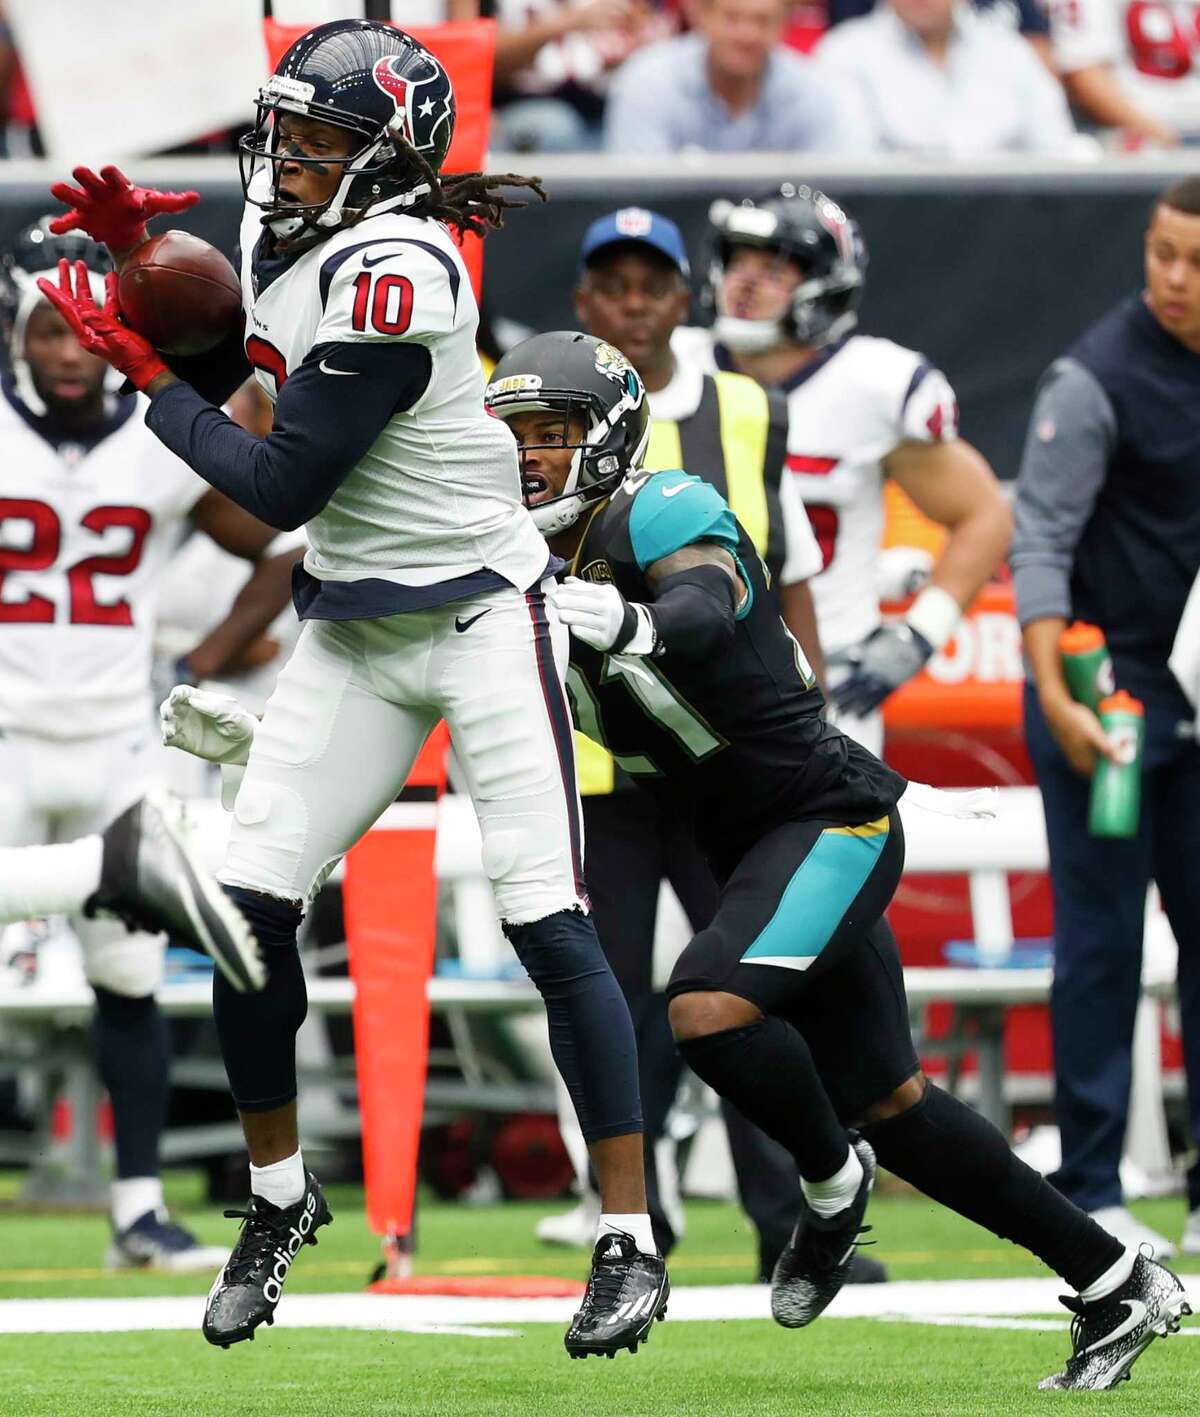 Texans receiver DeAndre Hopkins, left, makes a catch in front of Jaguars cornerback A.J. Bouye during Jacksonville's win in the season opener.